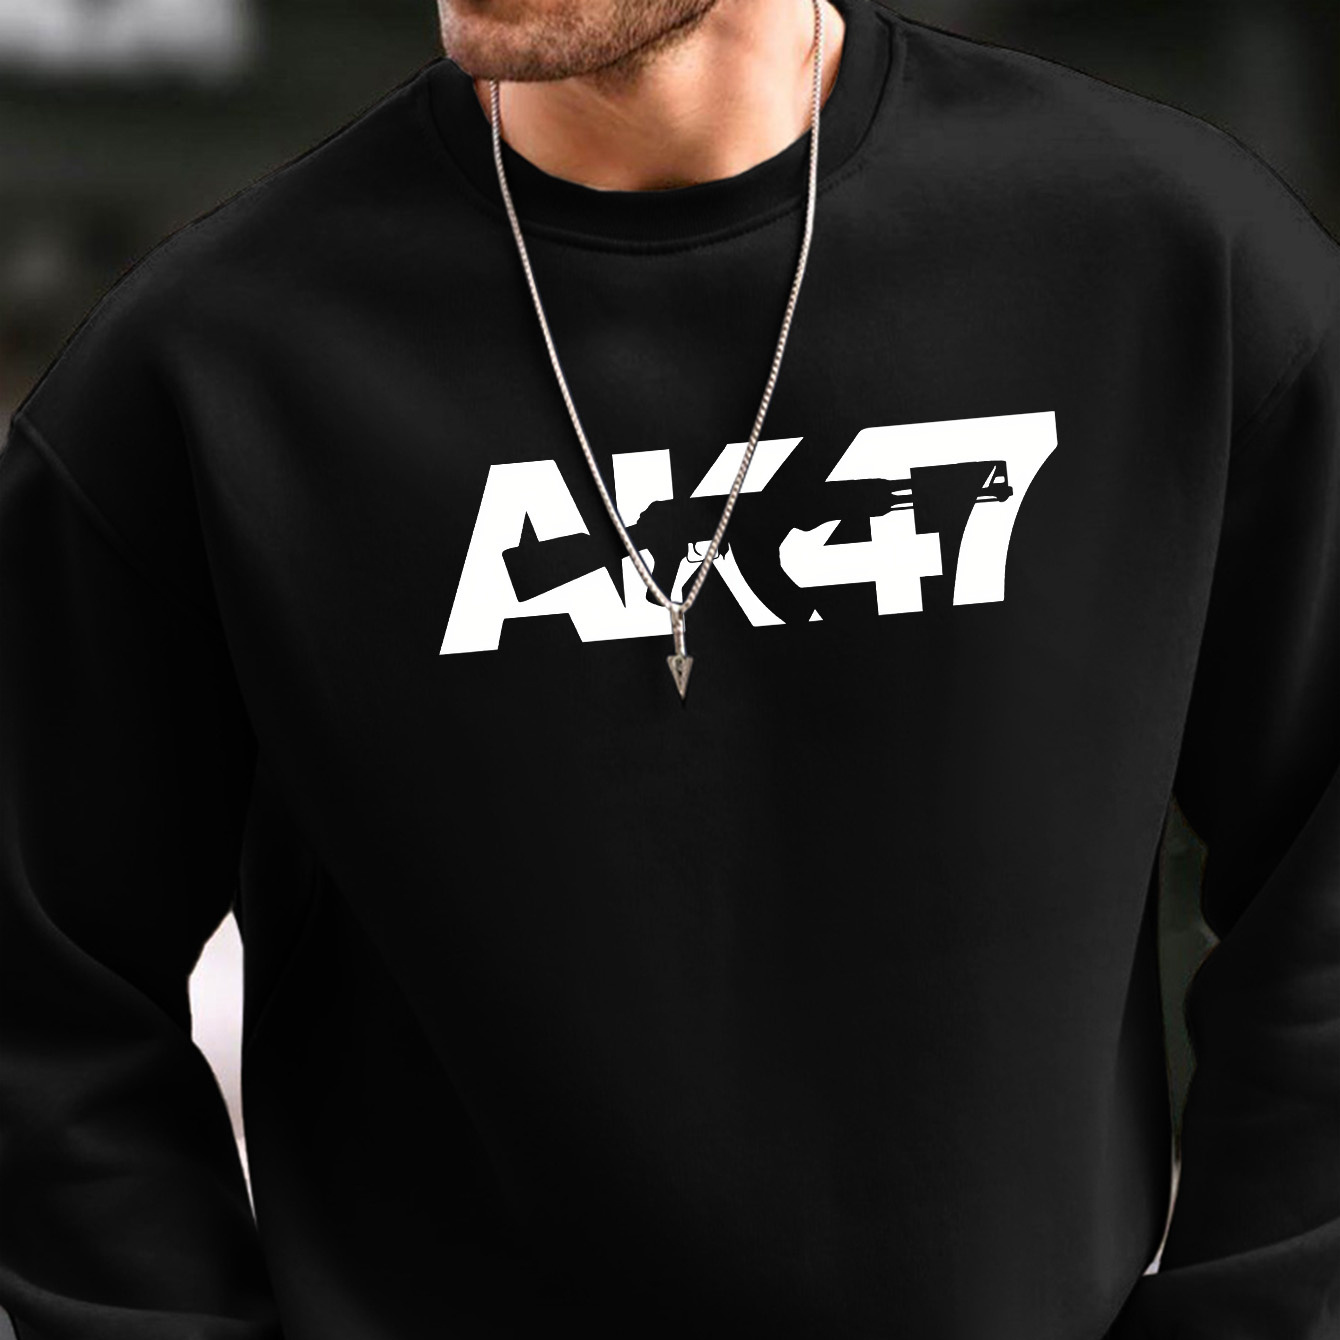 

Men's Crew Neck With White Letter Ak47 Printed Fashion Simple Casual Sweatshirt